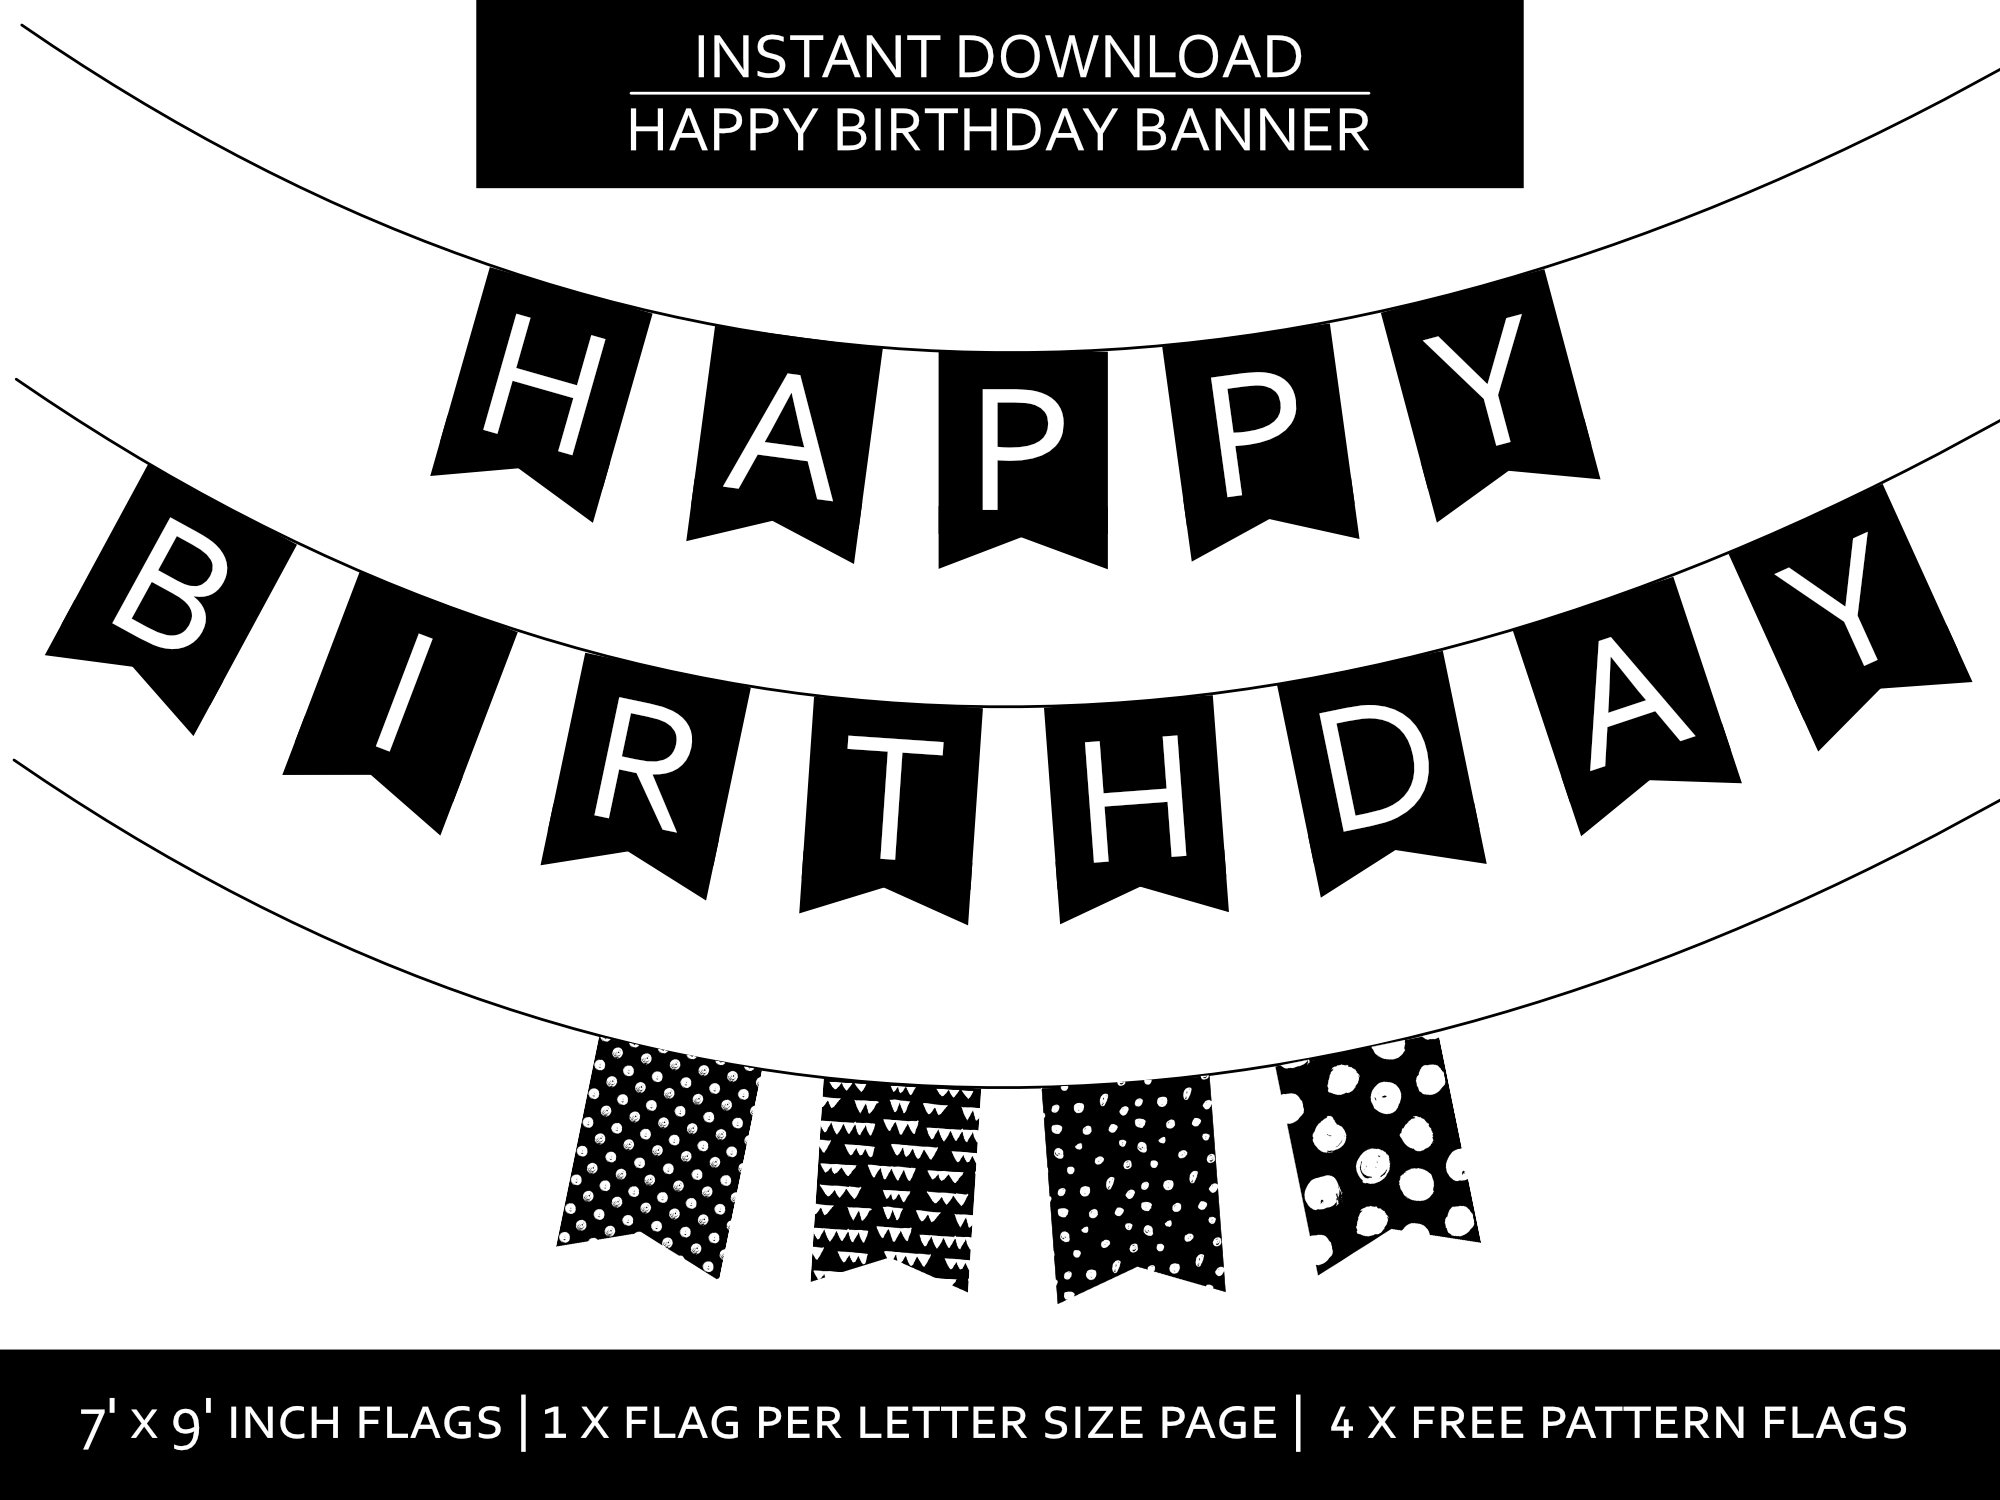 Happy Birthday Printable Banner Party Black White Simple Banner Instant Download Decoration Digital Birthday At Home Printing Etsy